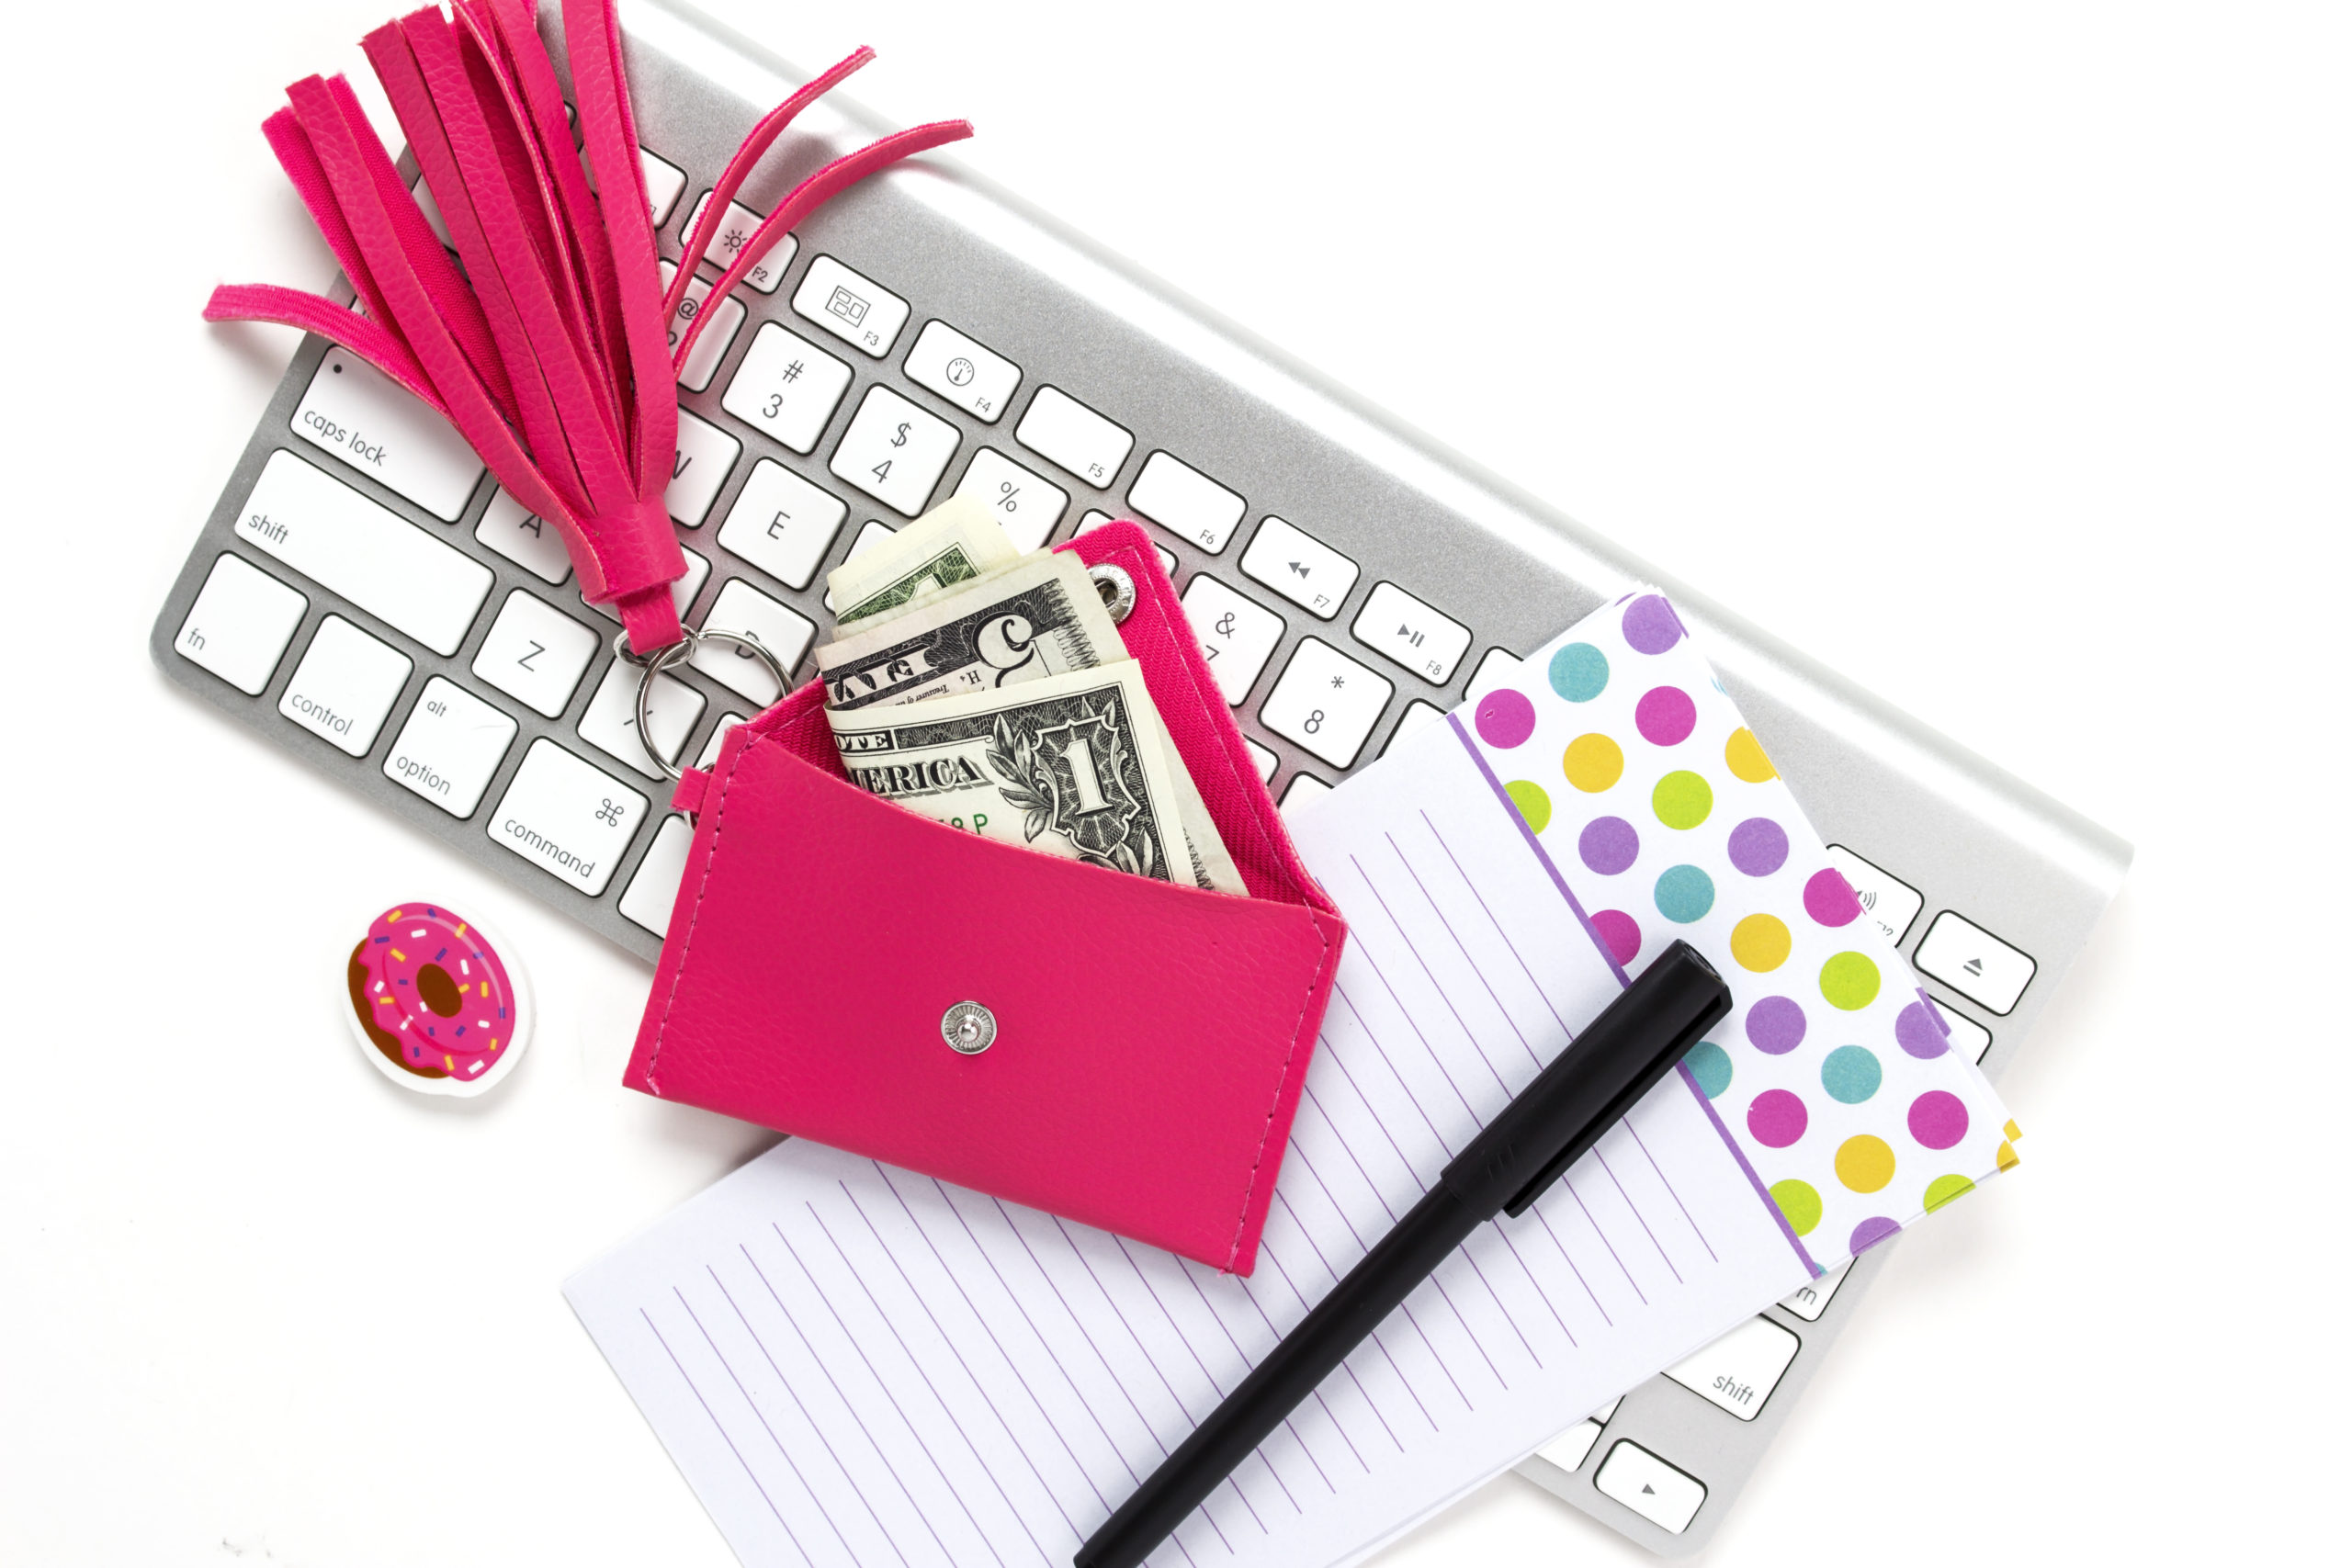 Dollar-note-in-a-pink-purse-on-a-key-board-and-white-paper-with-black-pen